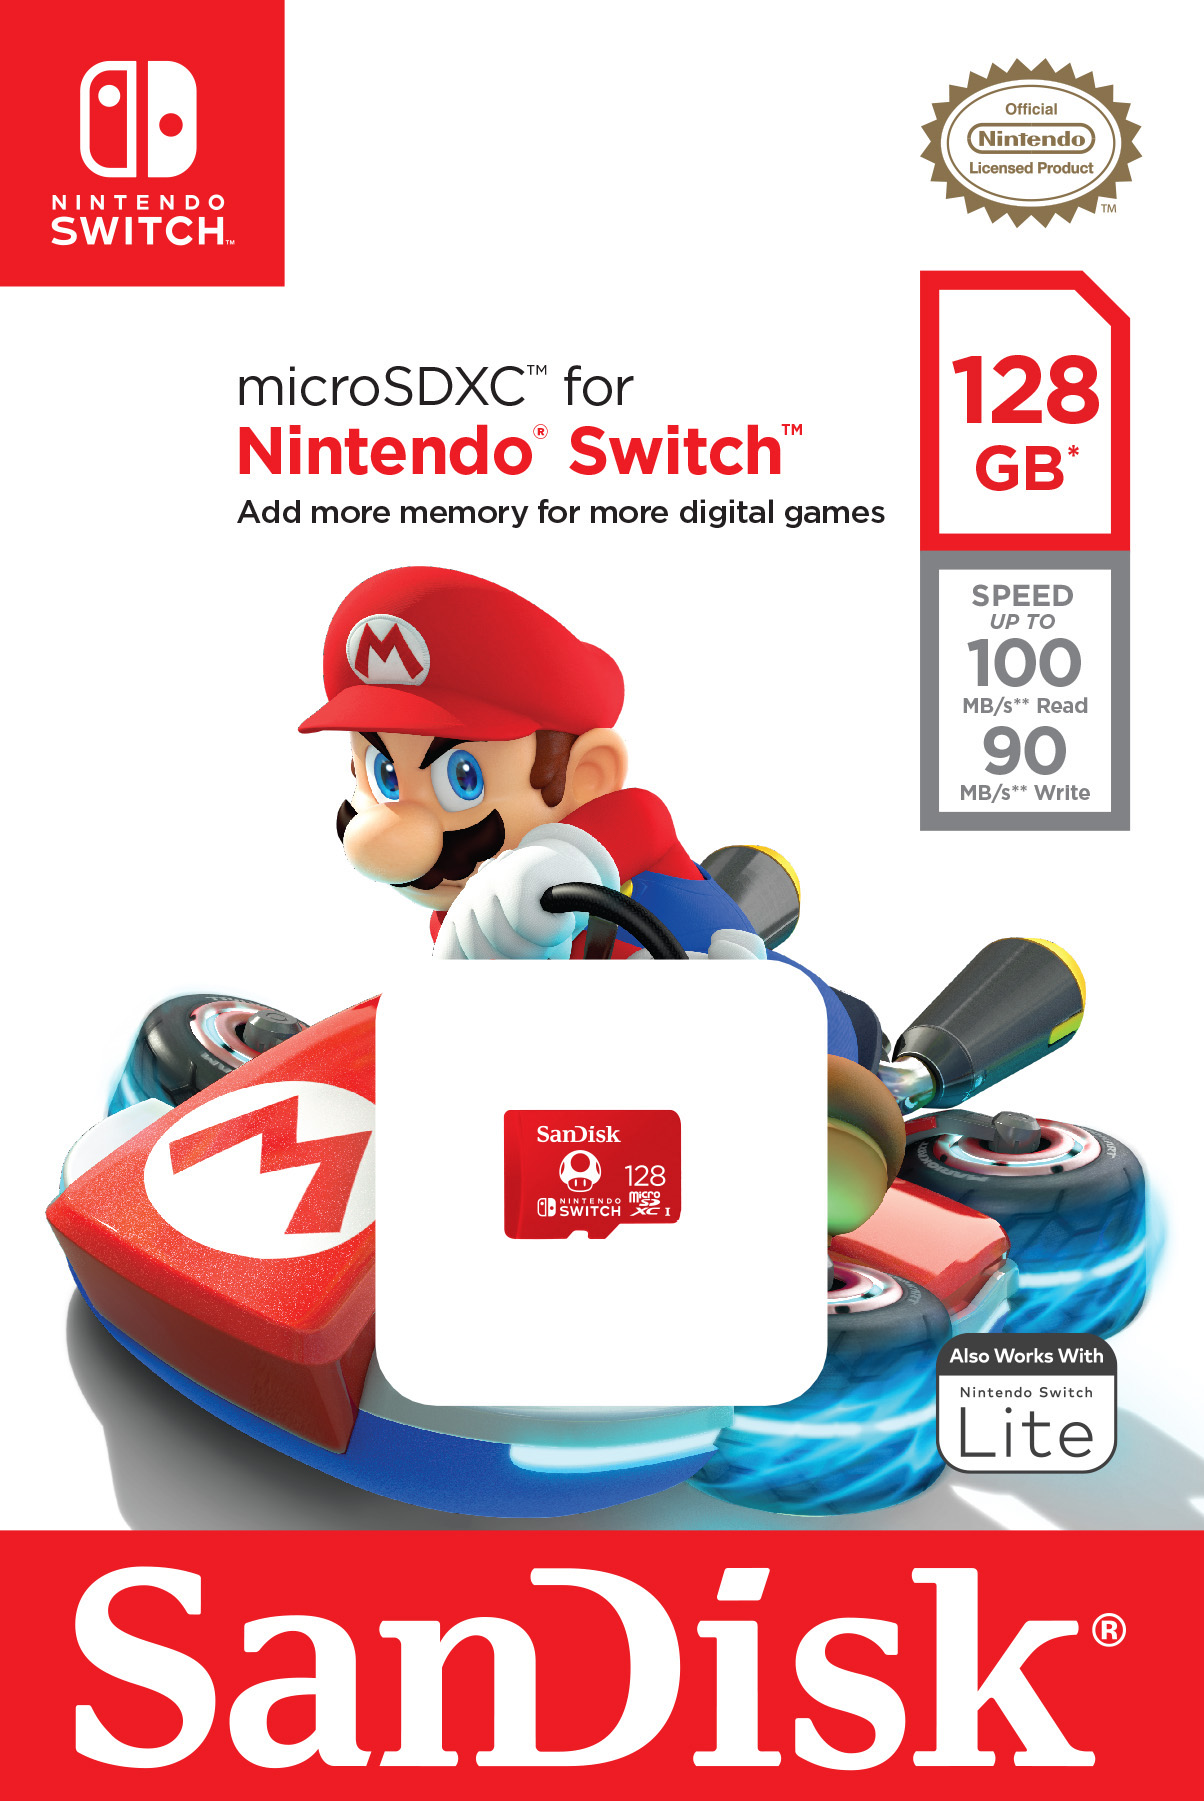 SanDisk 128GB microSDXC UHS-I Memory Card Licensed for Nintendo Switch, Red - 100MB/s, Micro SD Card - SDSQXBO-128G-AWCZA - image 5 of 7